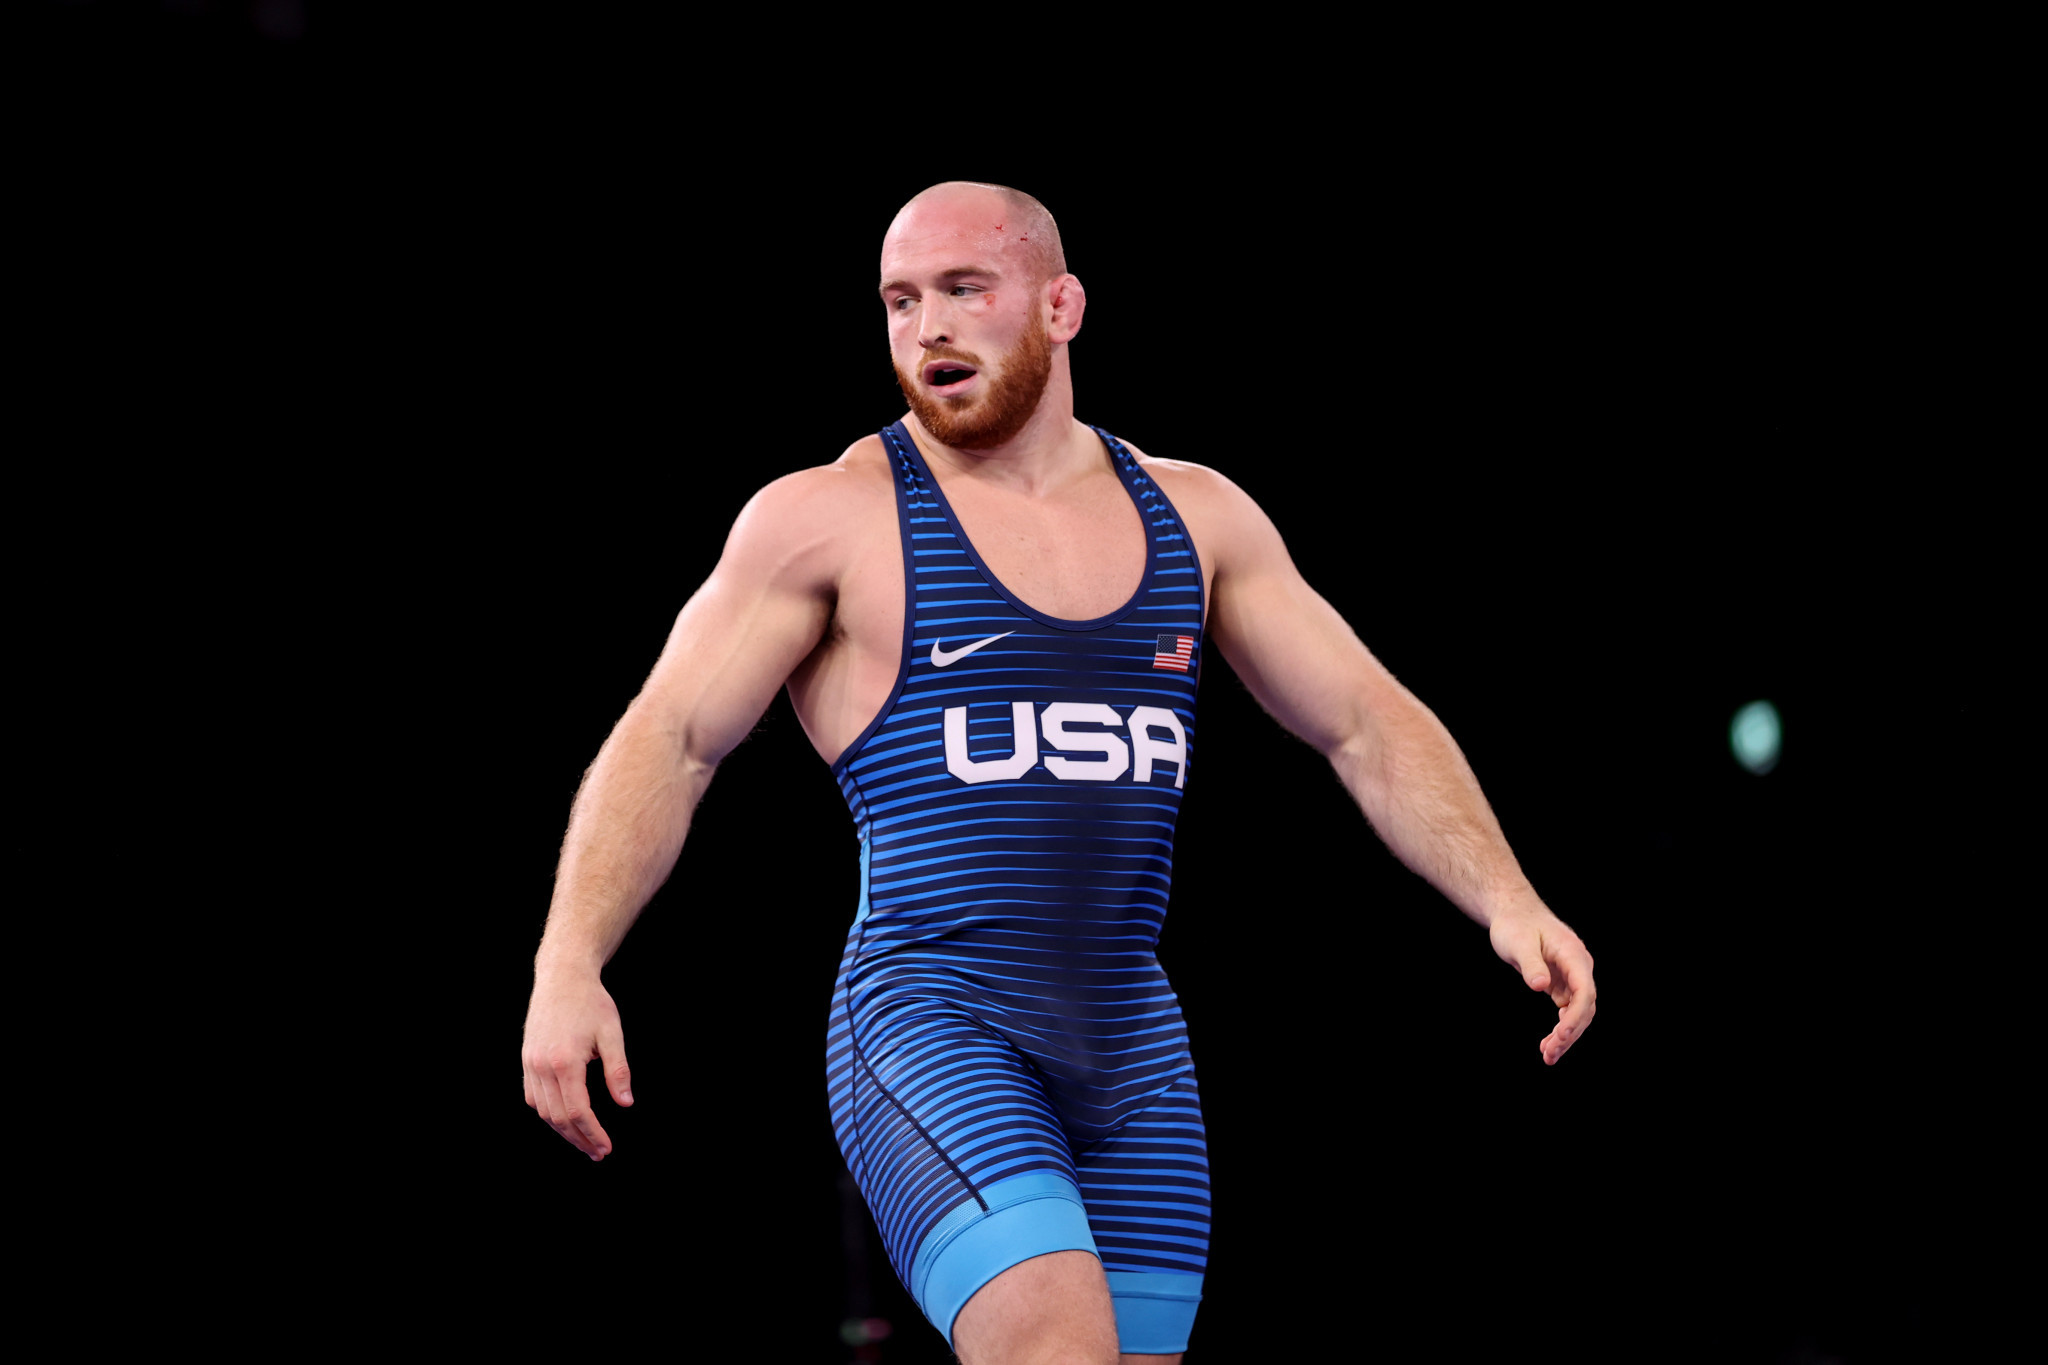 The US' Tokyo 2020 silver medallist Kyle Snyder dominated the 97kg event at the Pan American Championships ©Getty Images